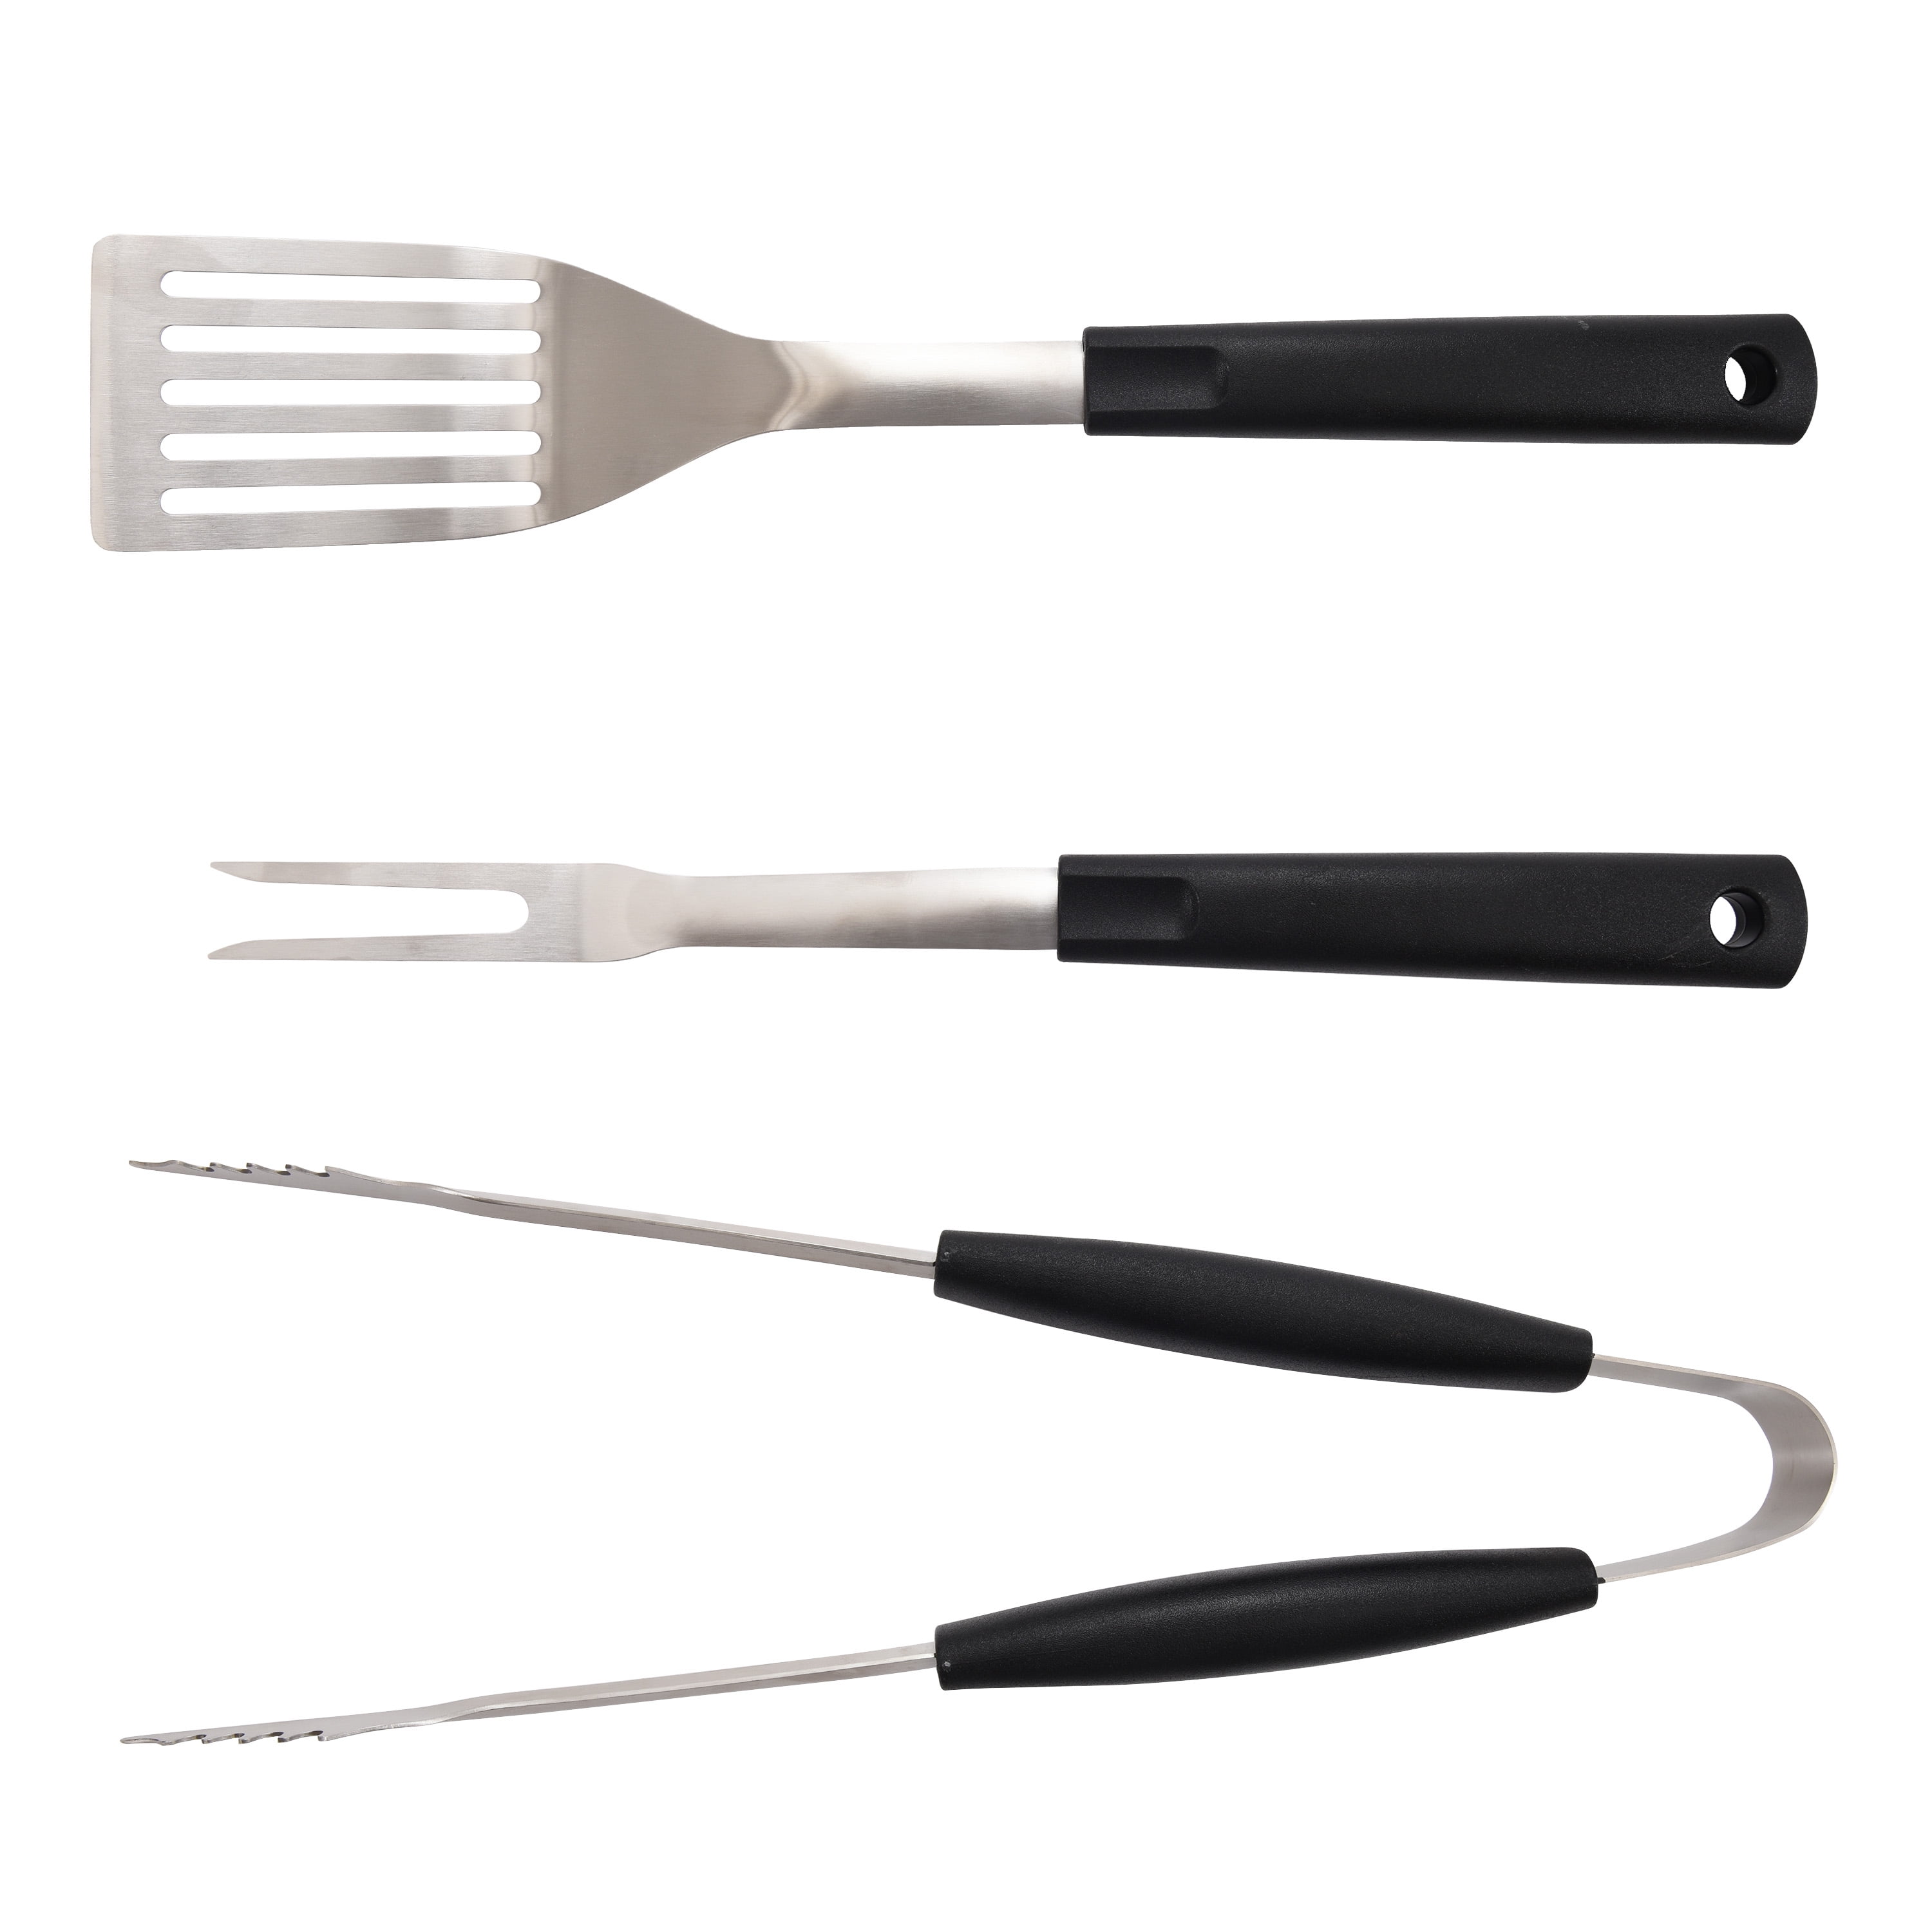 FAMILY MAID 3 Piece Grill Tool Set (3-In-1 BBQ Grill Brush,Grill  Cleaner,Turner)